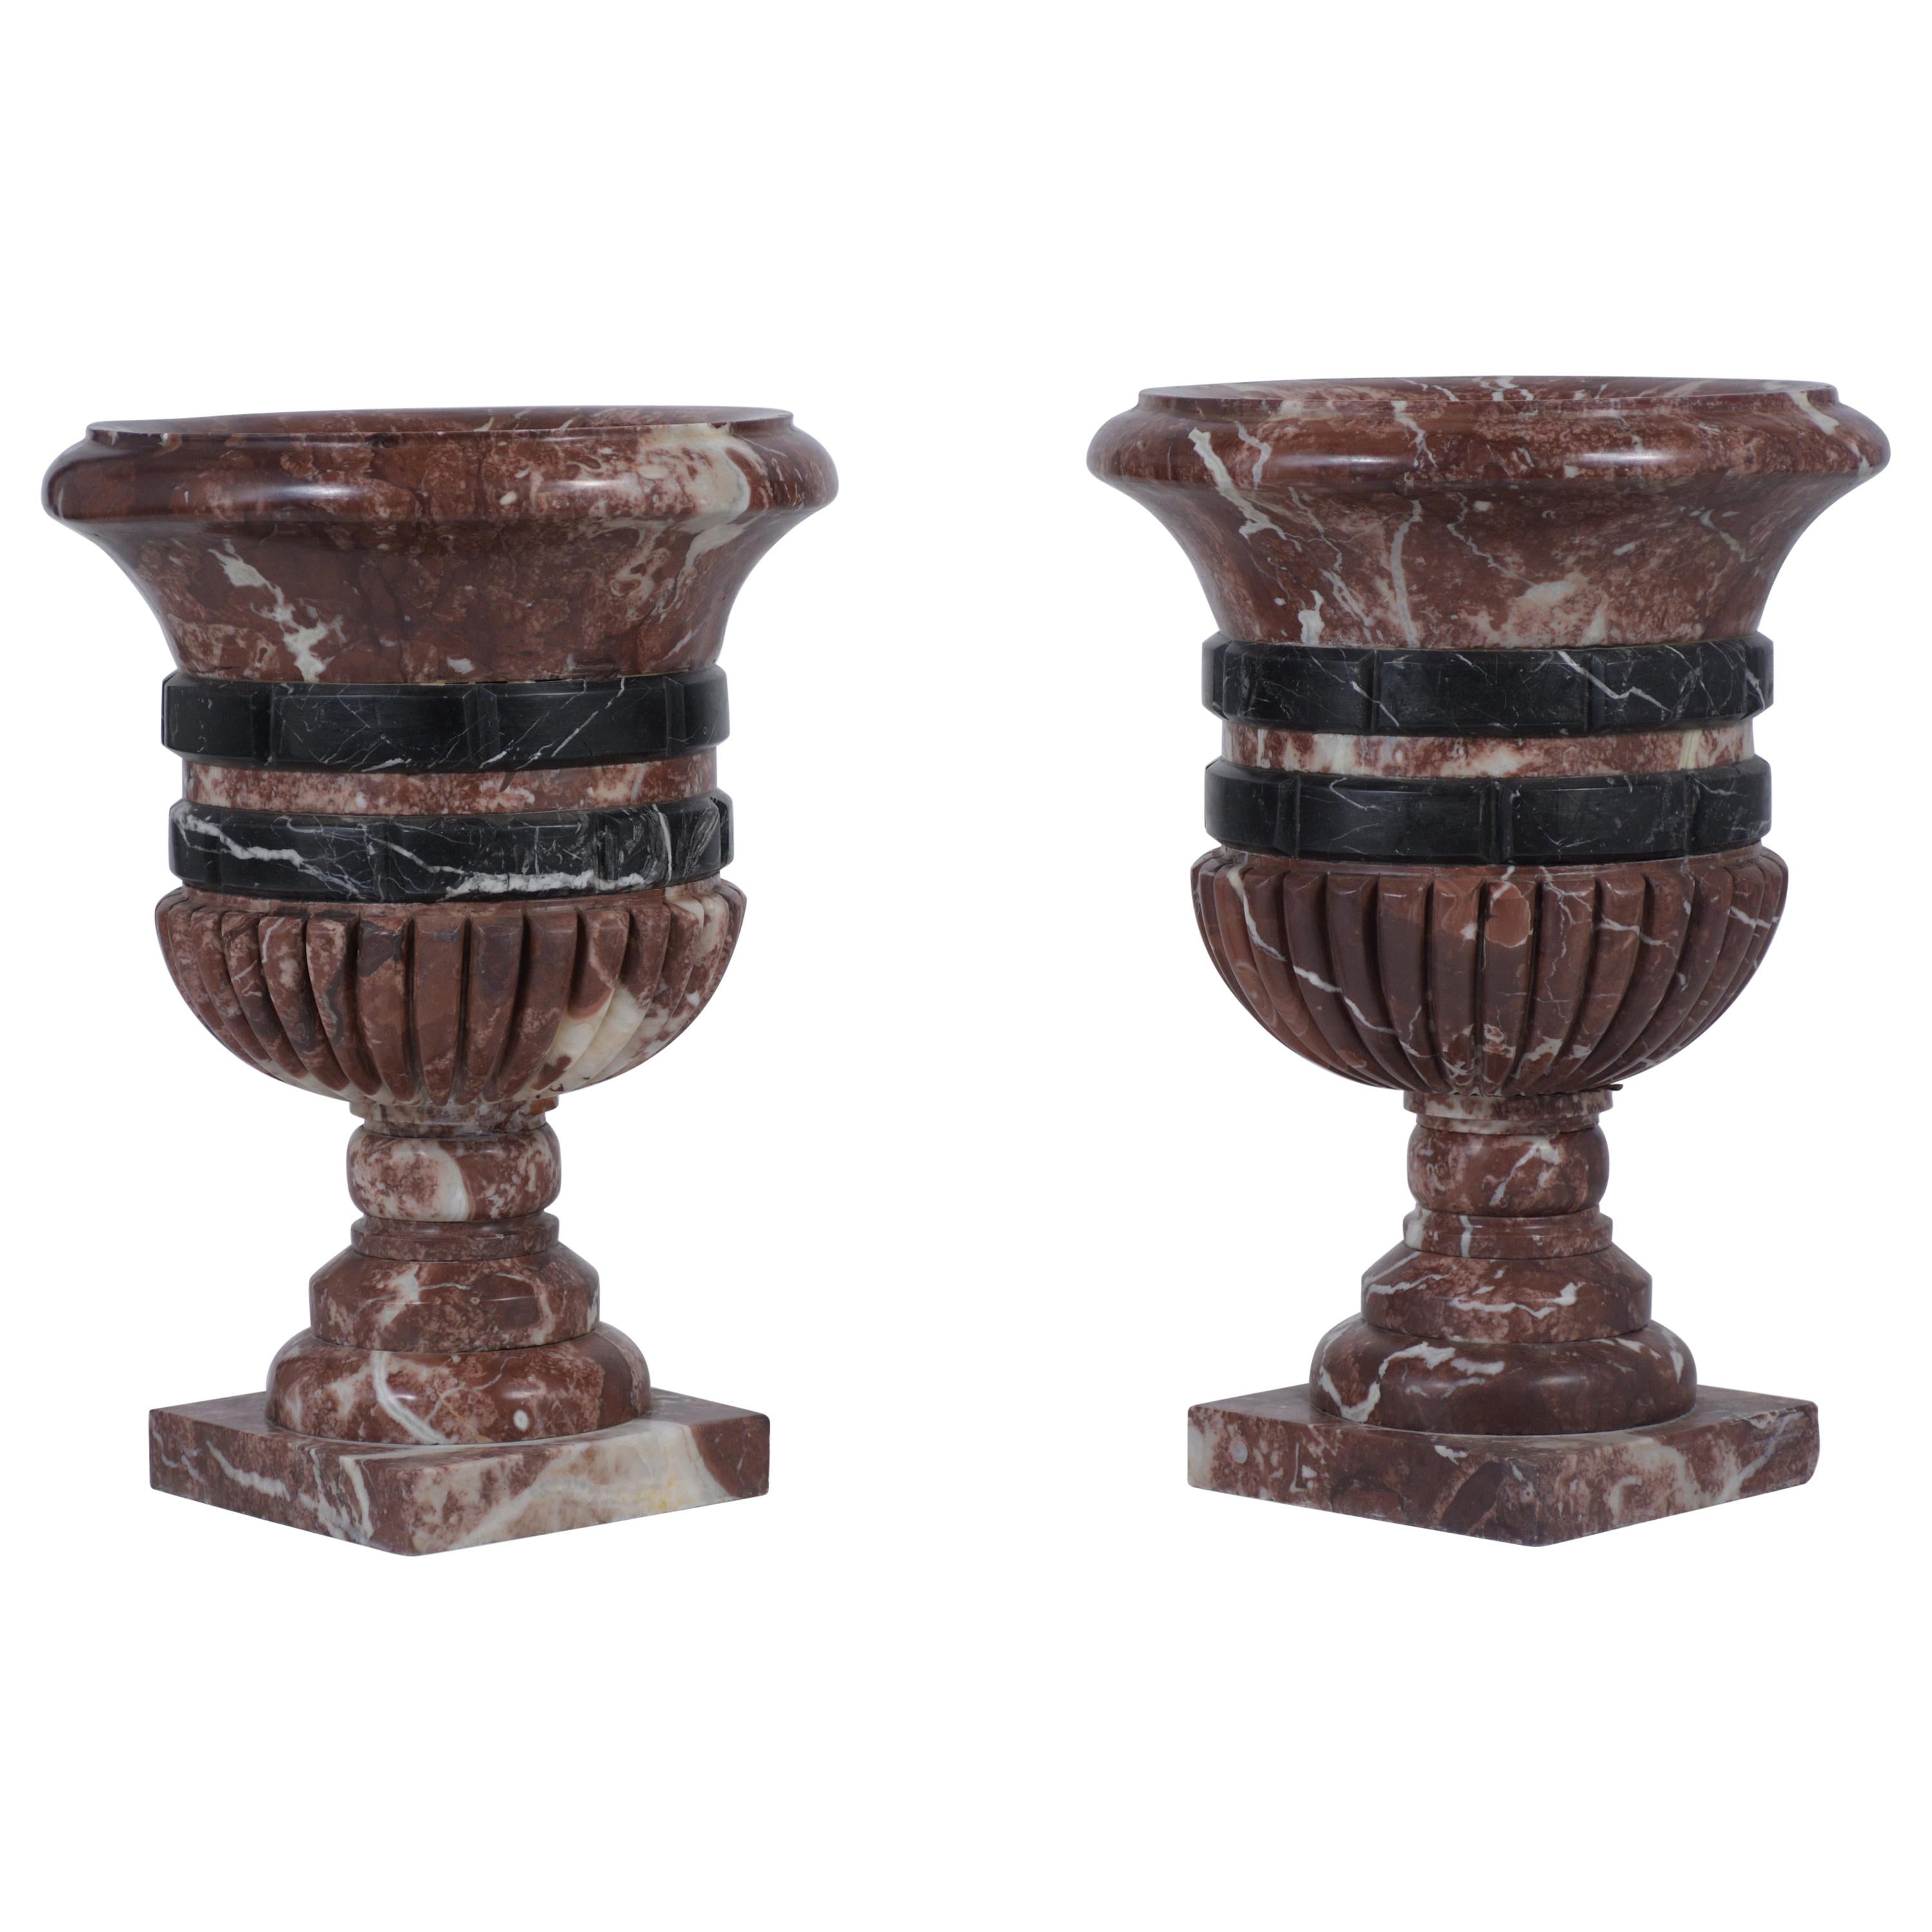 Pair of French Rouge Marble Garden Urns